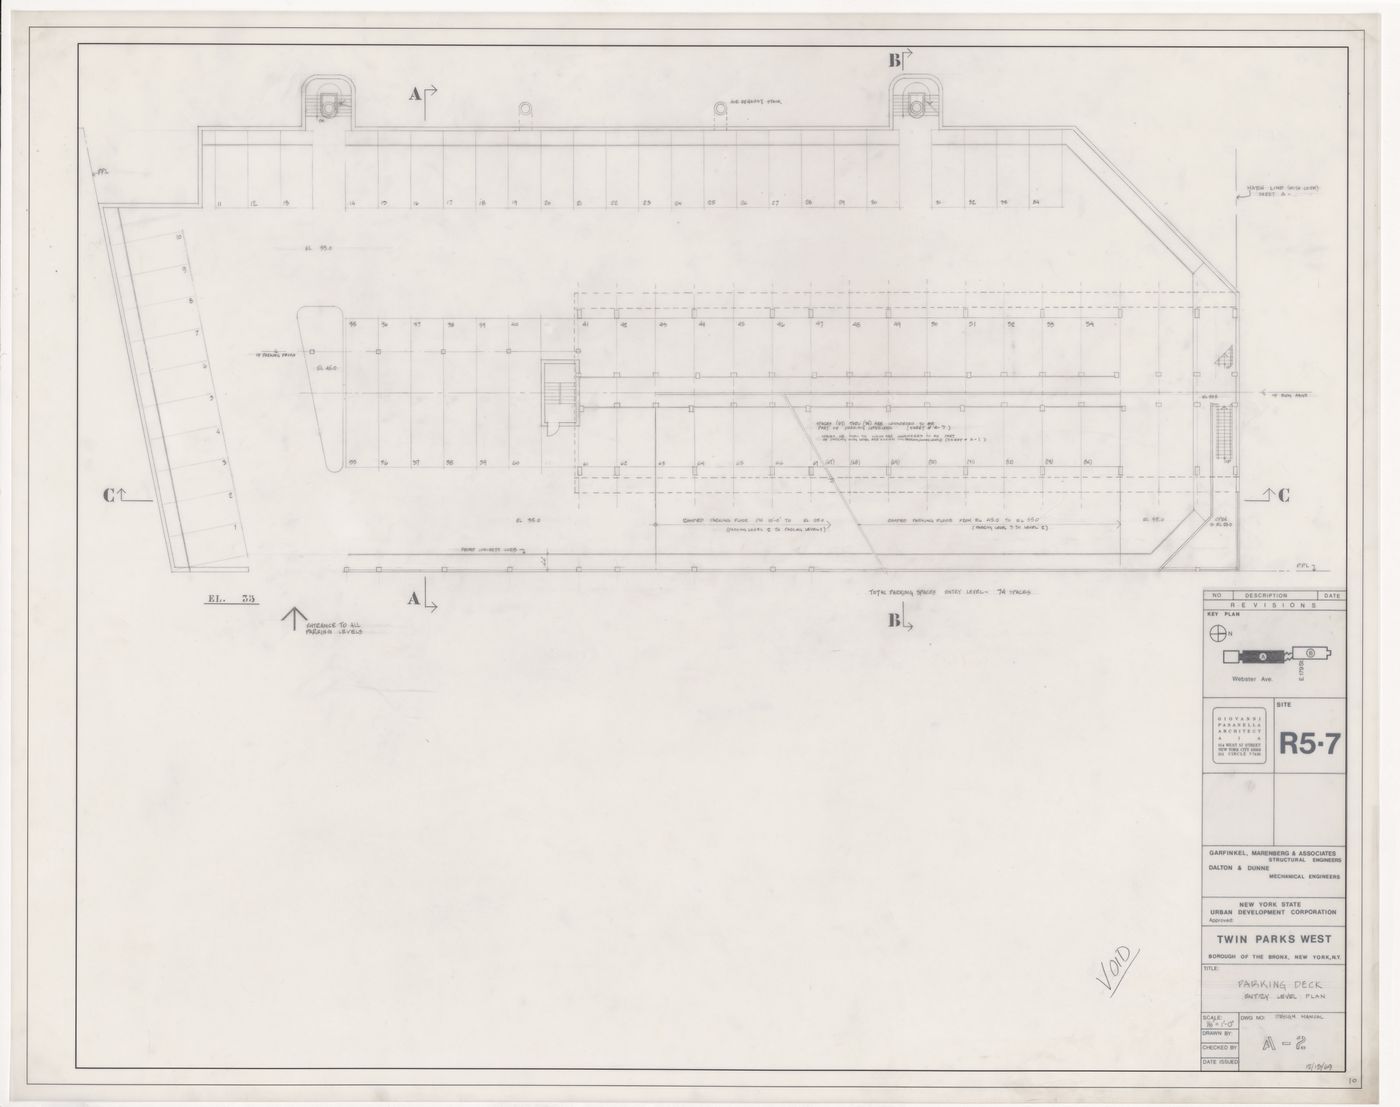 Parking deck plan for Twin Parks West, Site R5-7, Bronx, New York